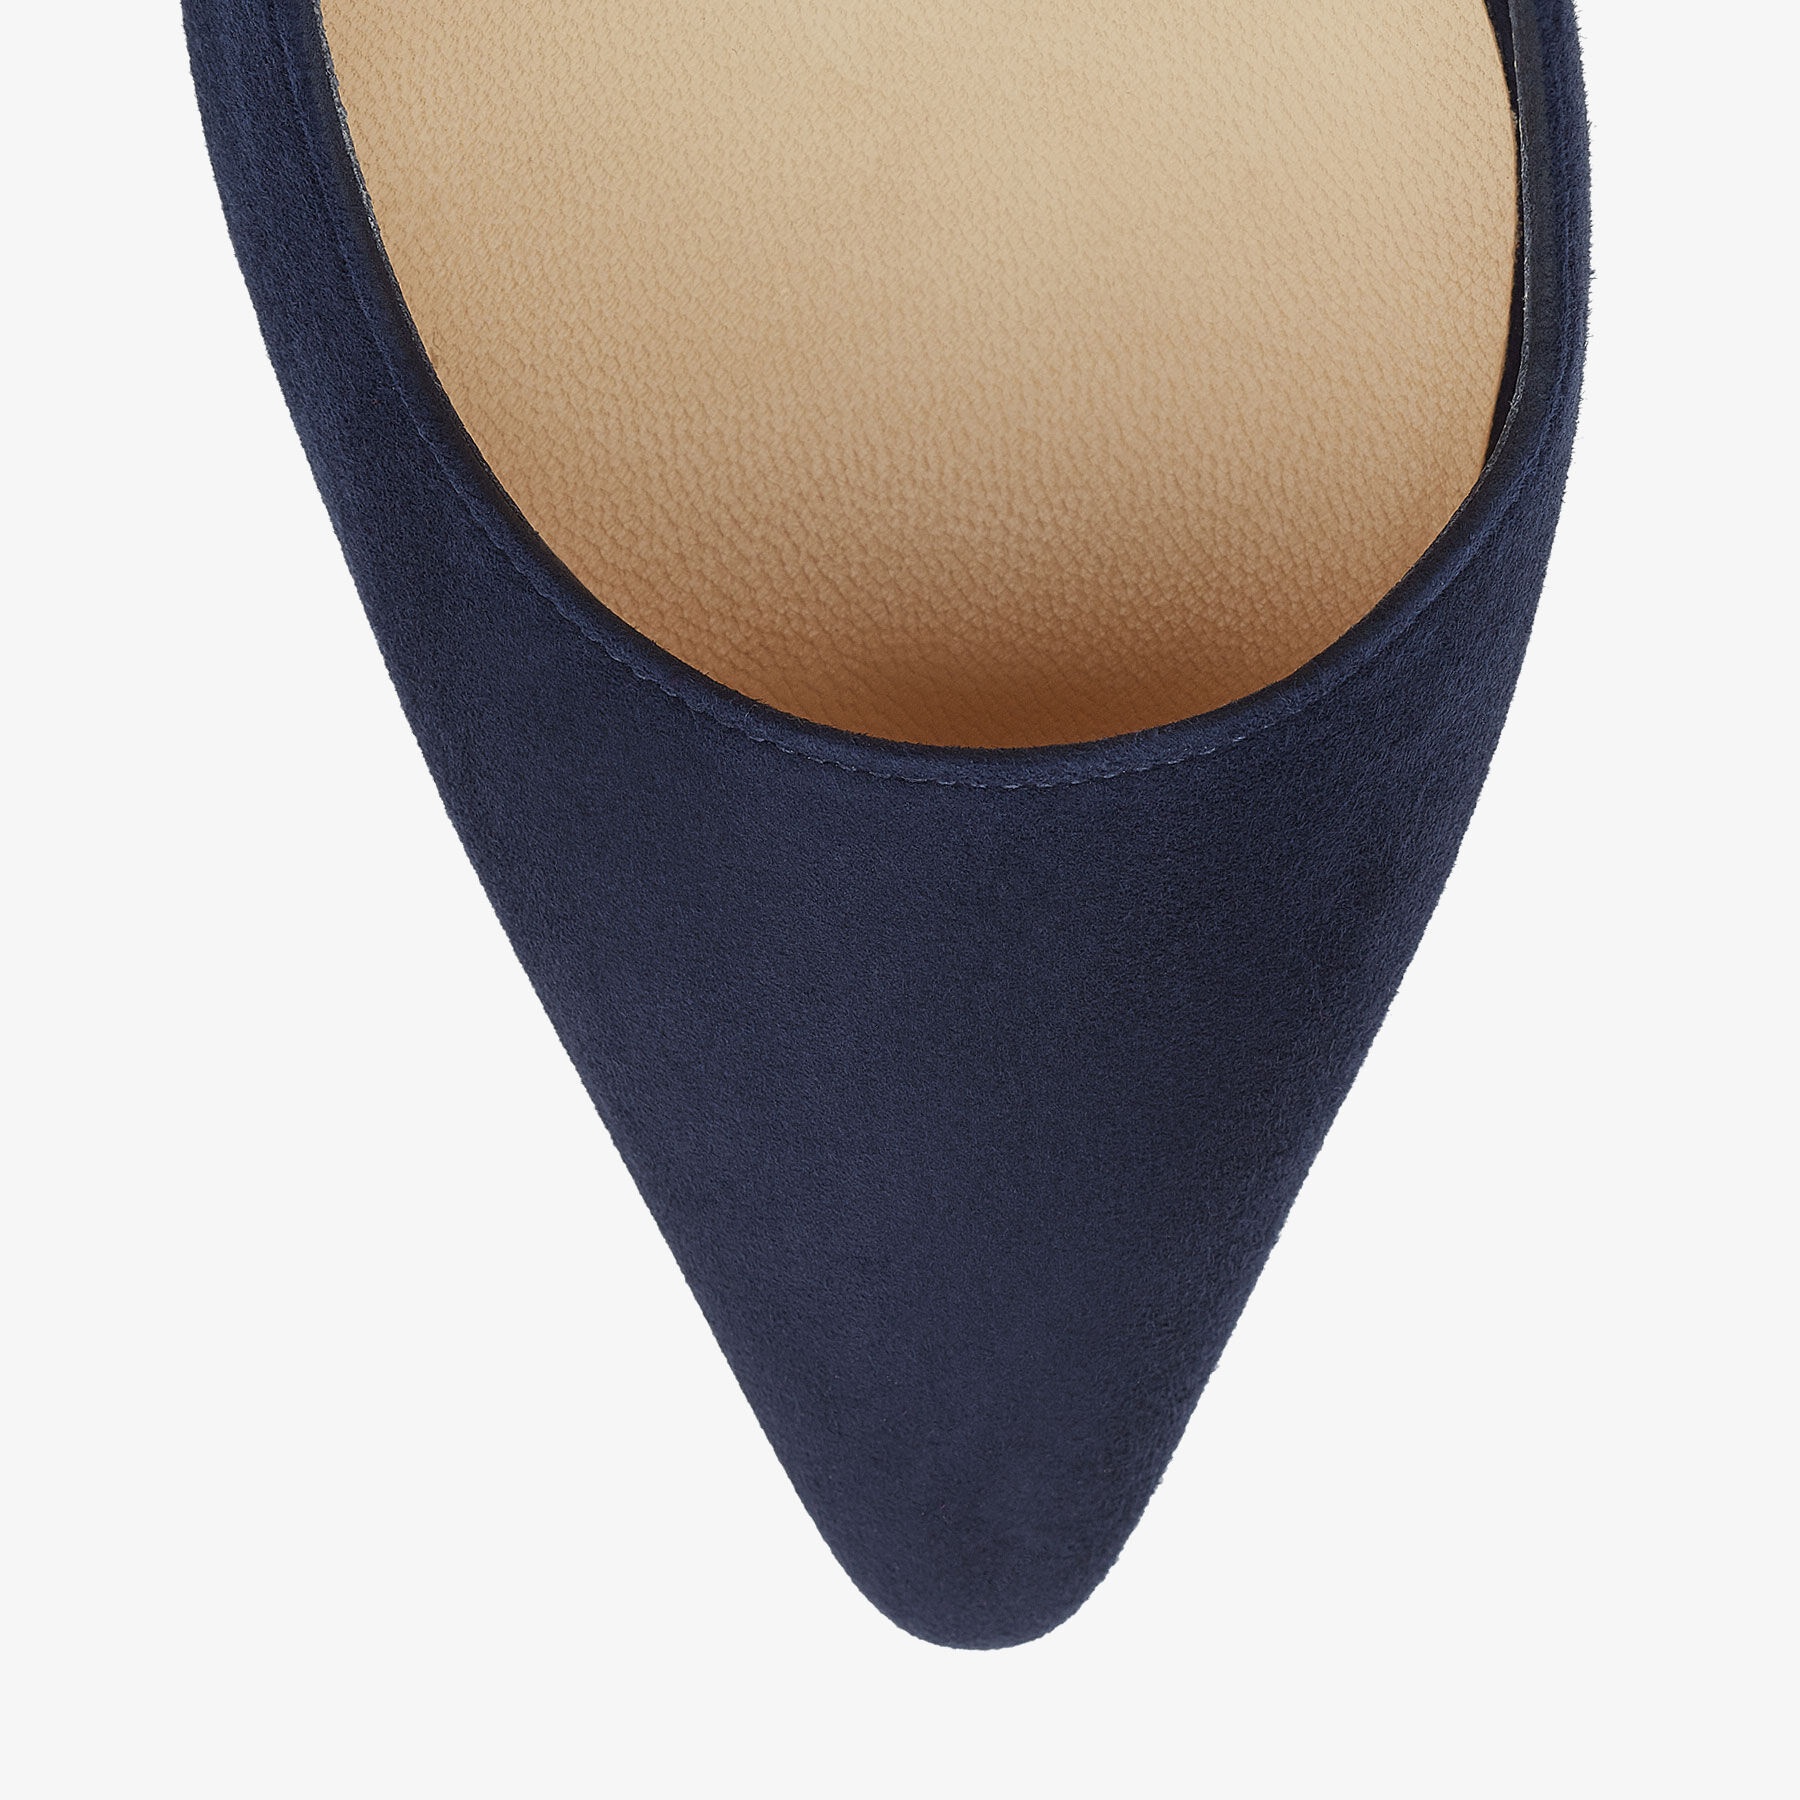 Romy 100
Navy Suede Pointed Pumps - 4